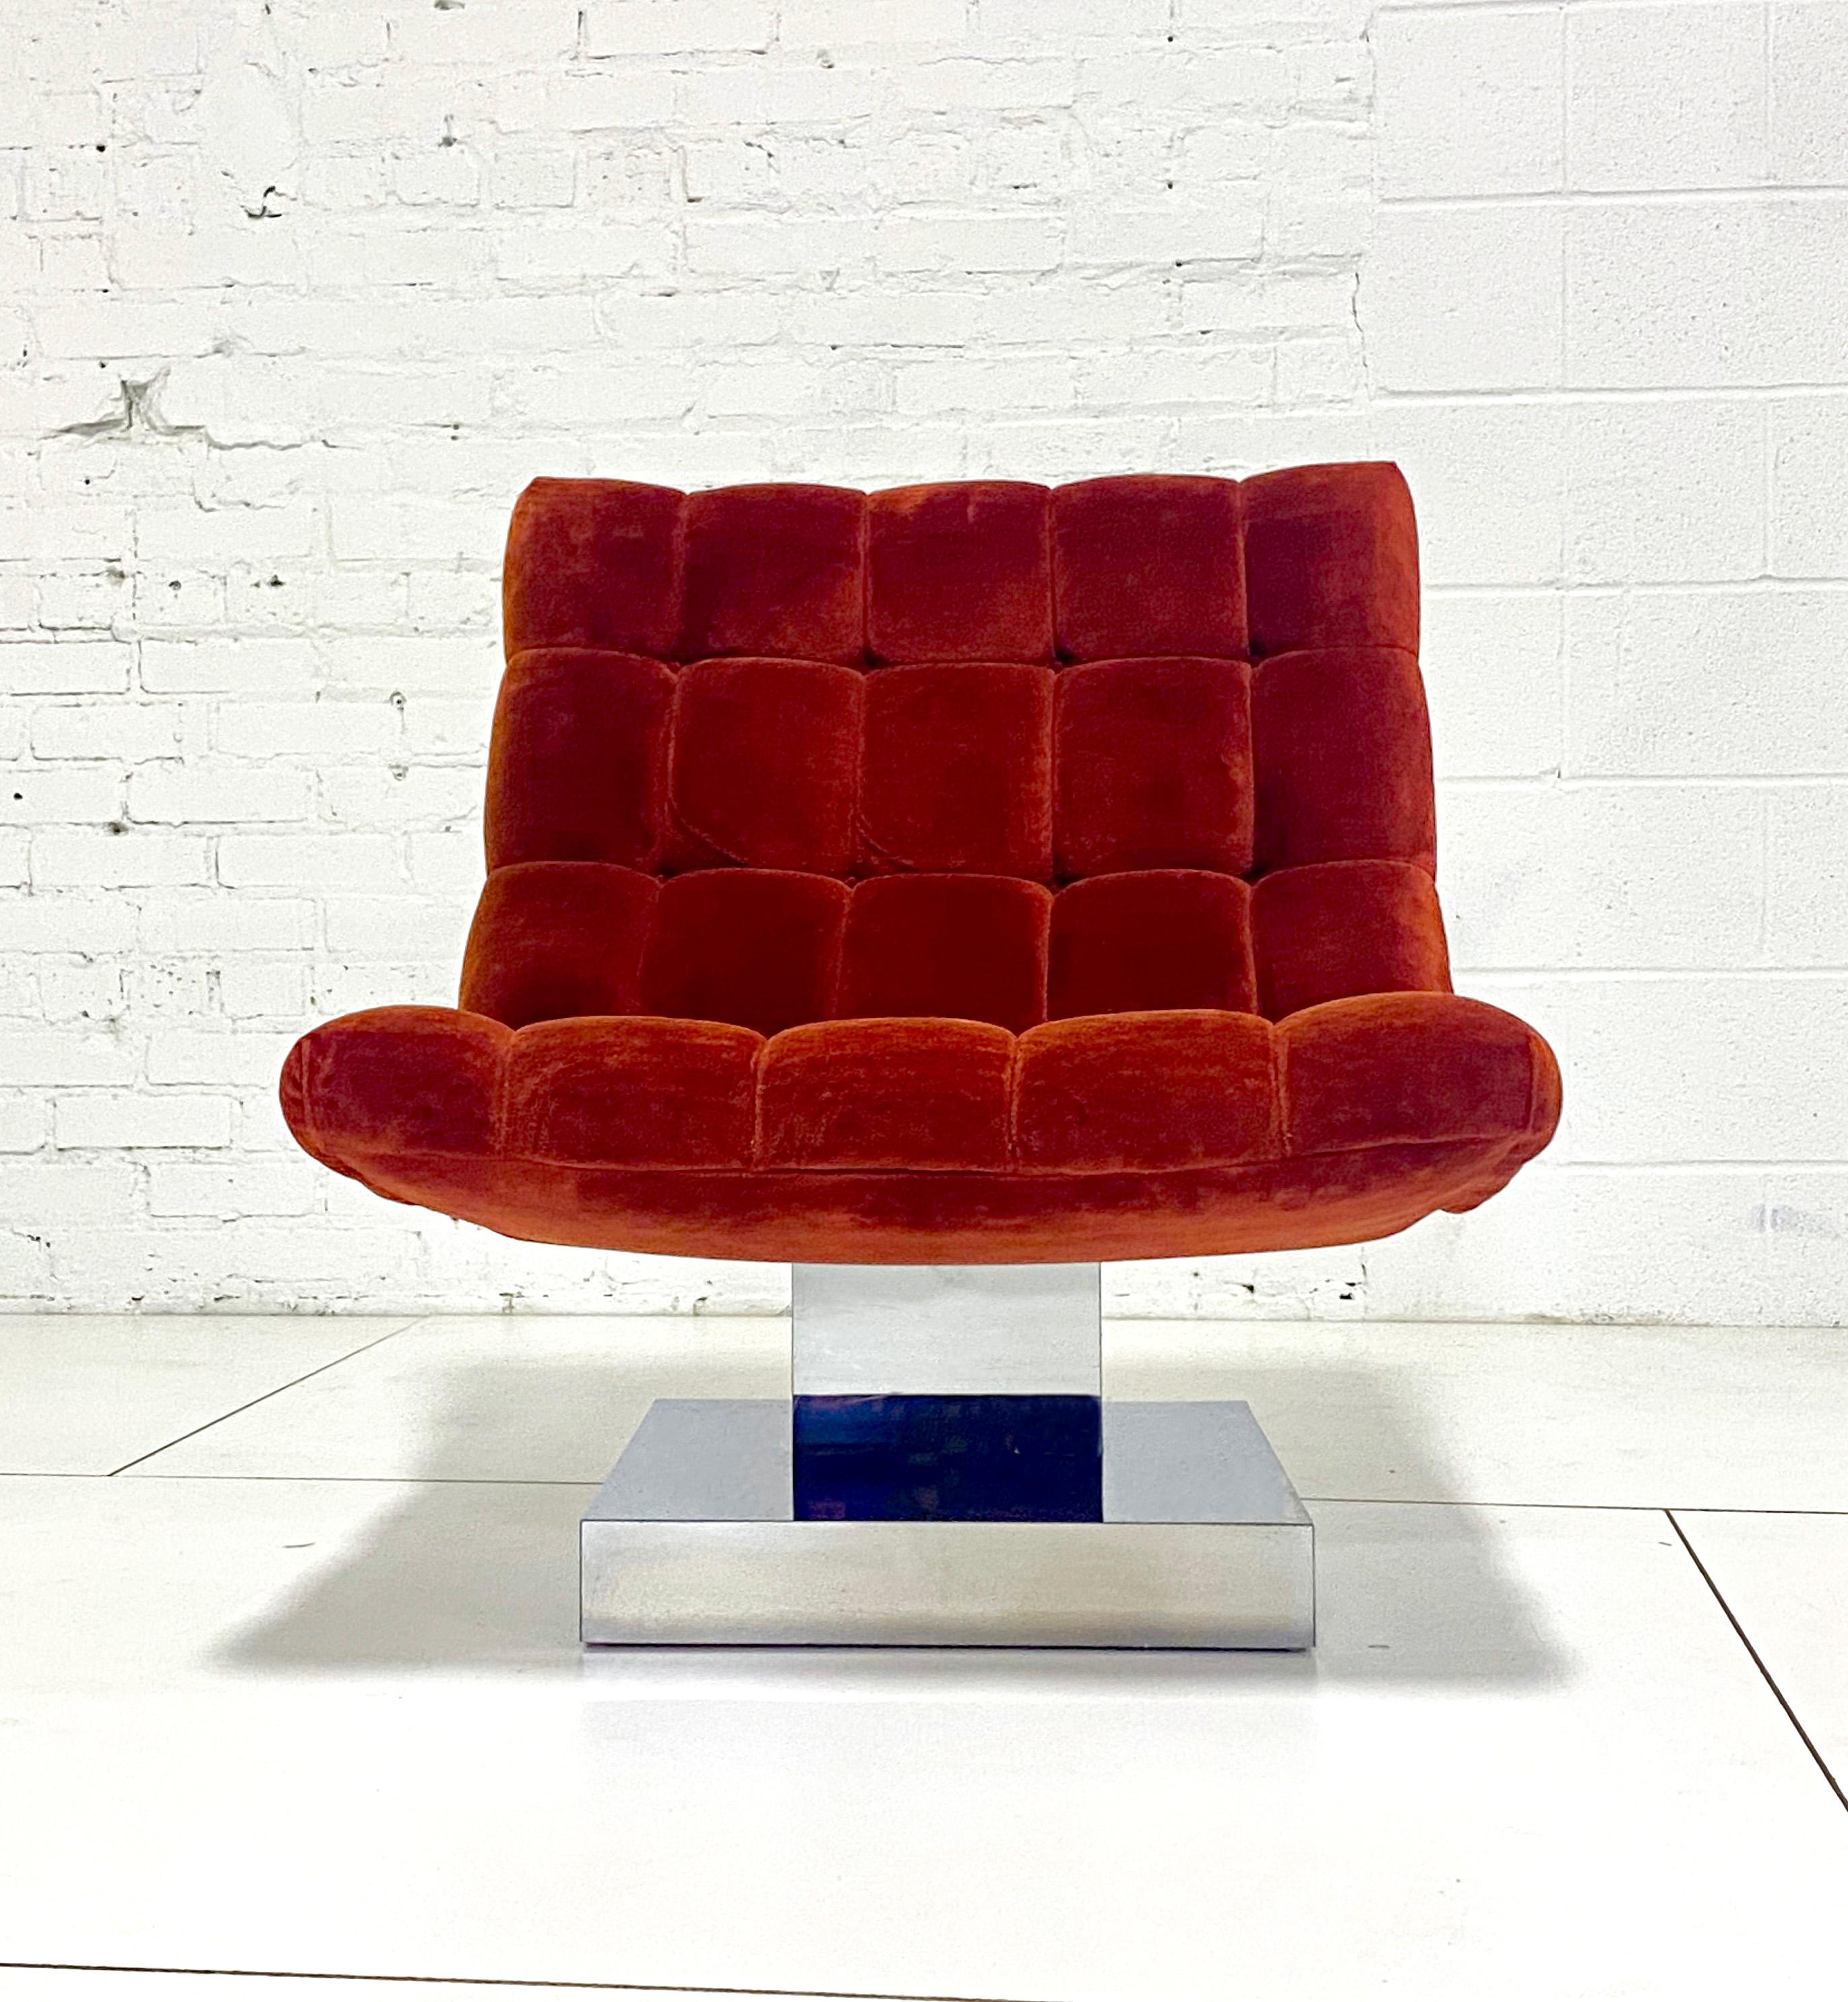 Milo Baughman tufted scoop chair on chrome base circa 1970s. Chrome pedestal gives a floating appearance.